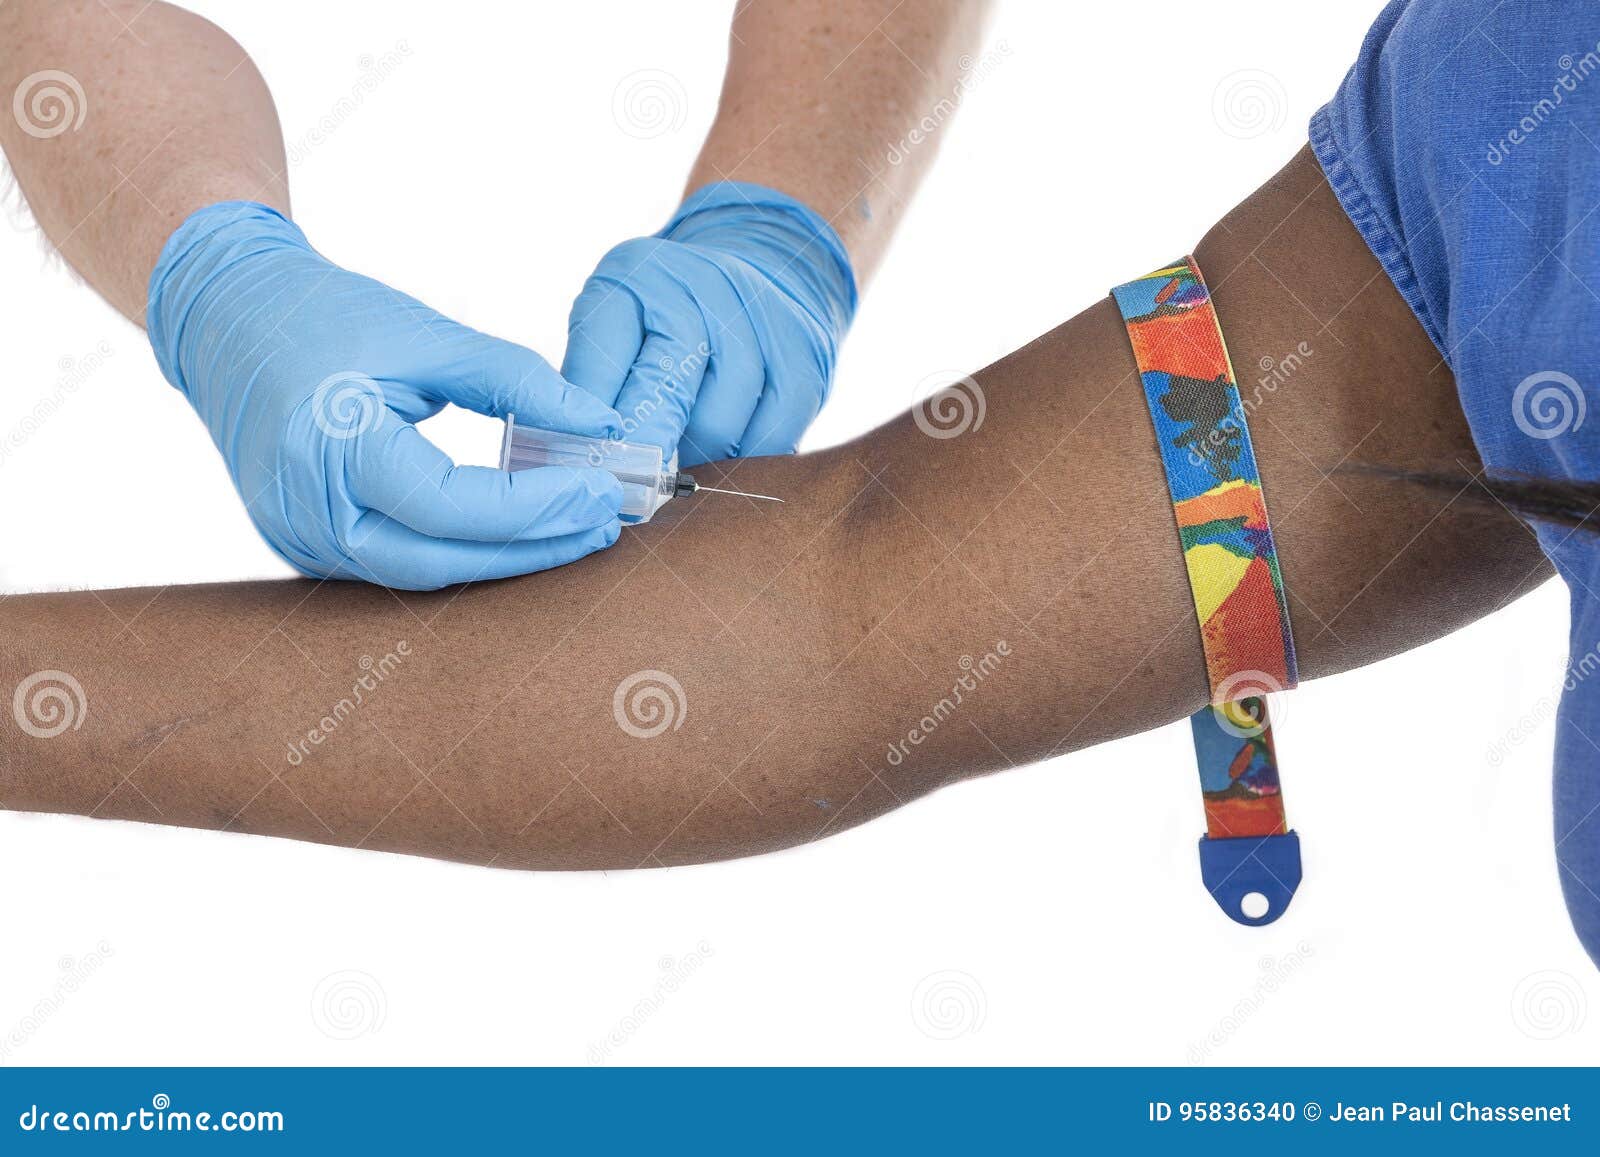 Confident Nurse Wearing Gloves In Hospital Stock Photo 